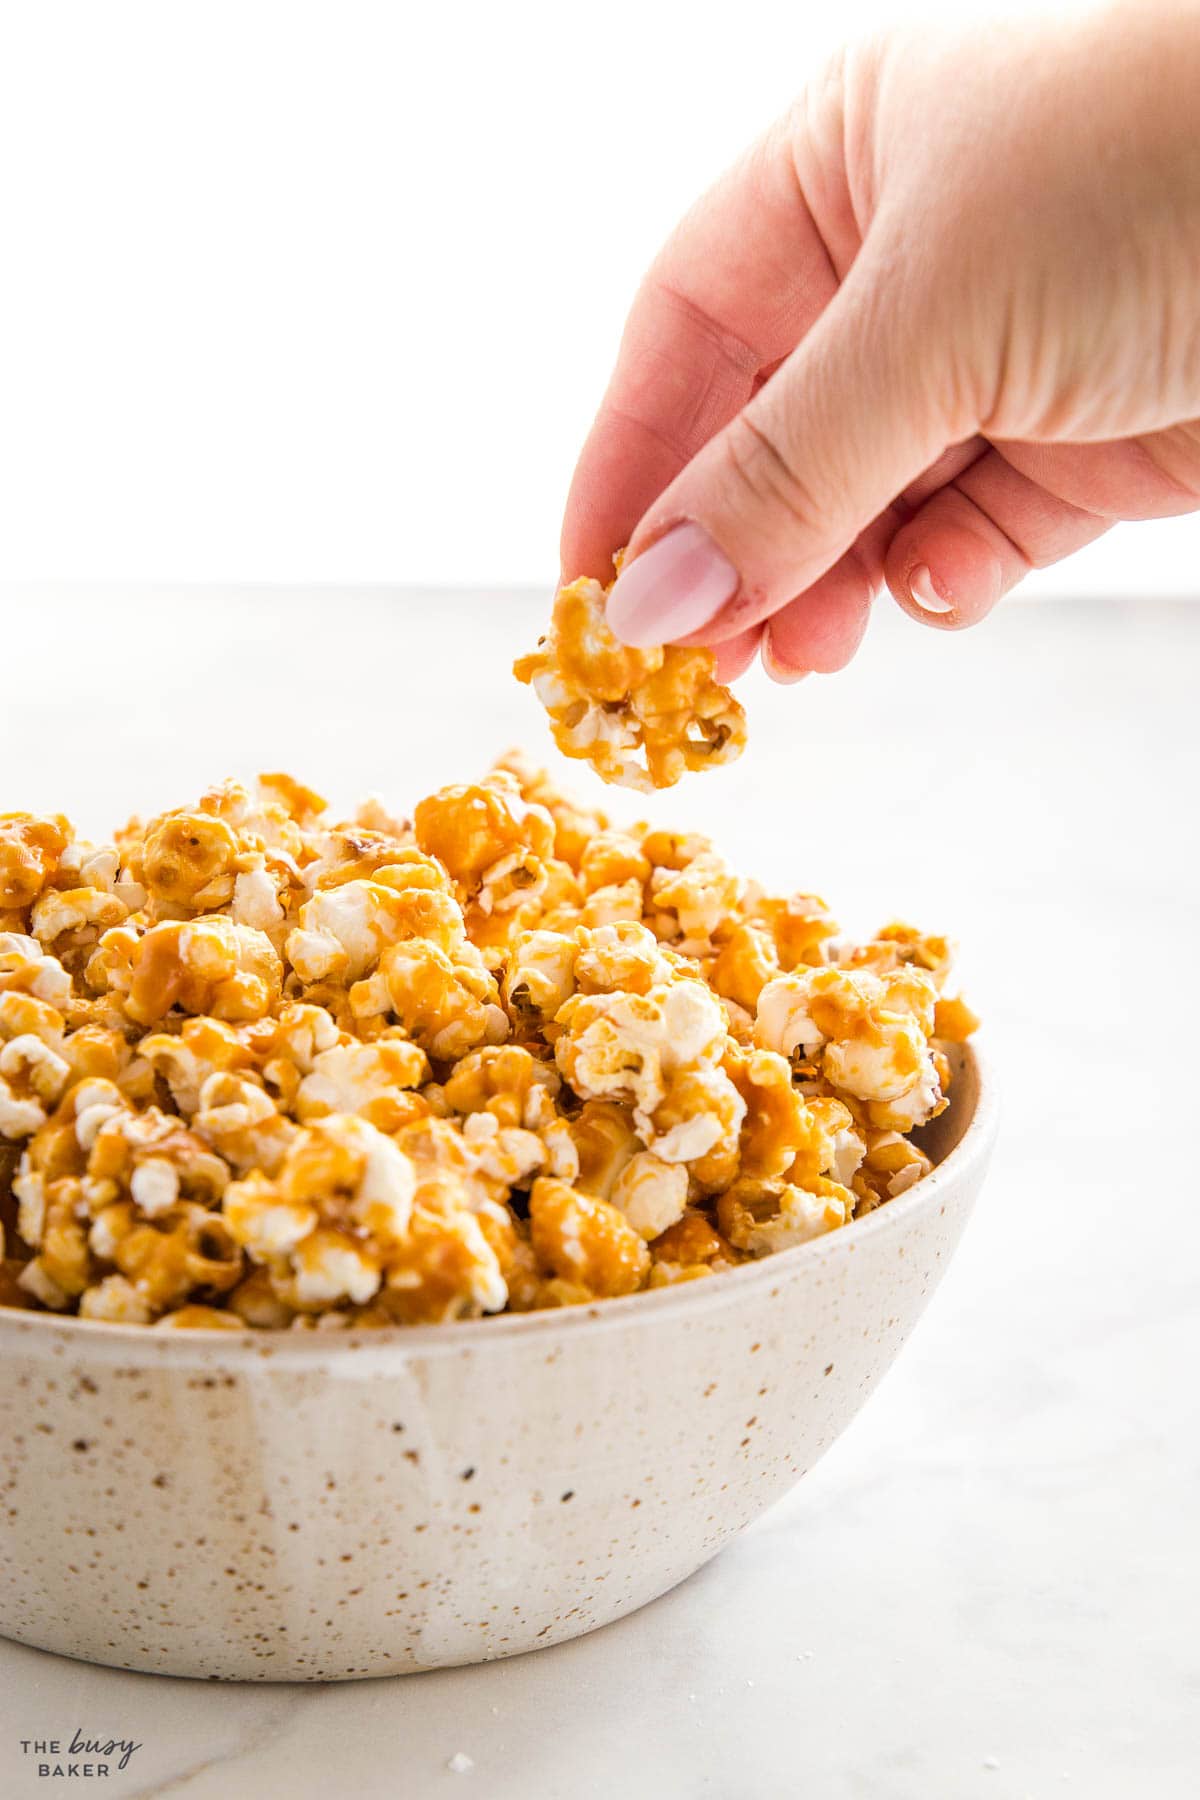 hand reaching for a piece of caramel popcorn from a bowl